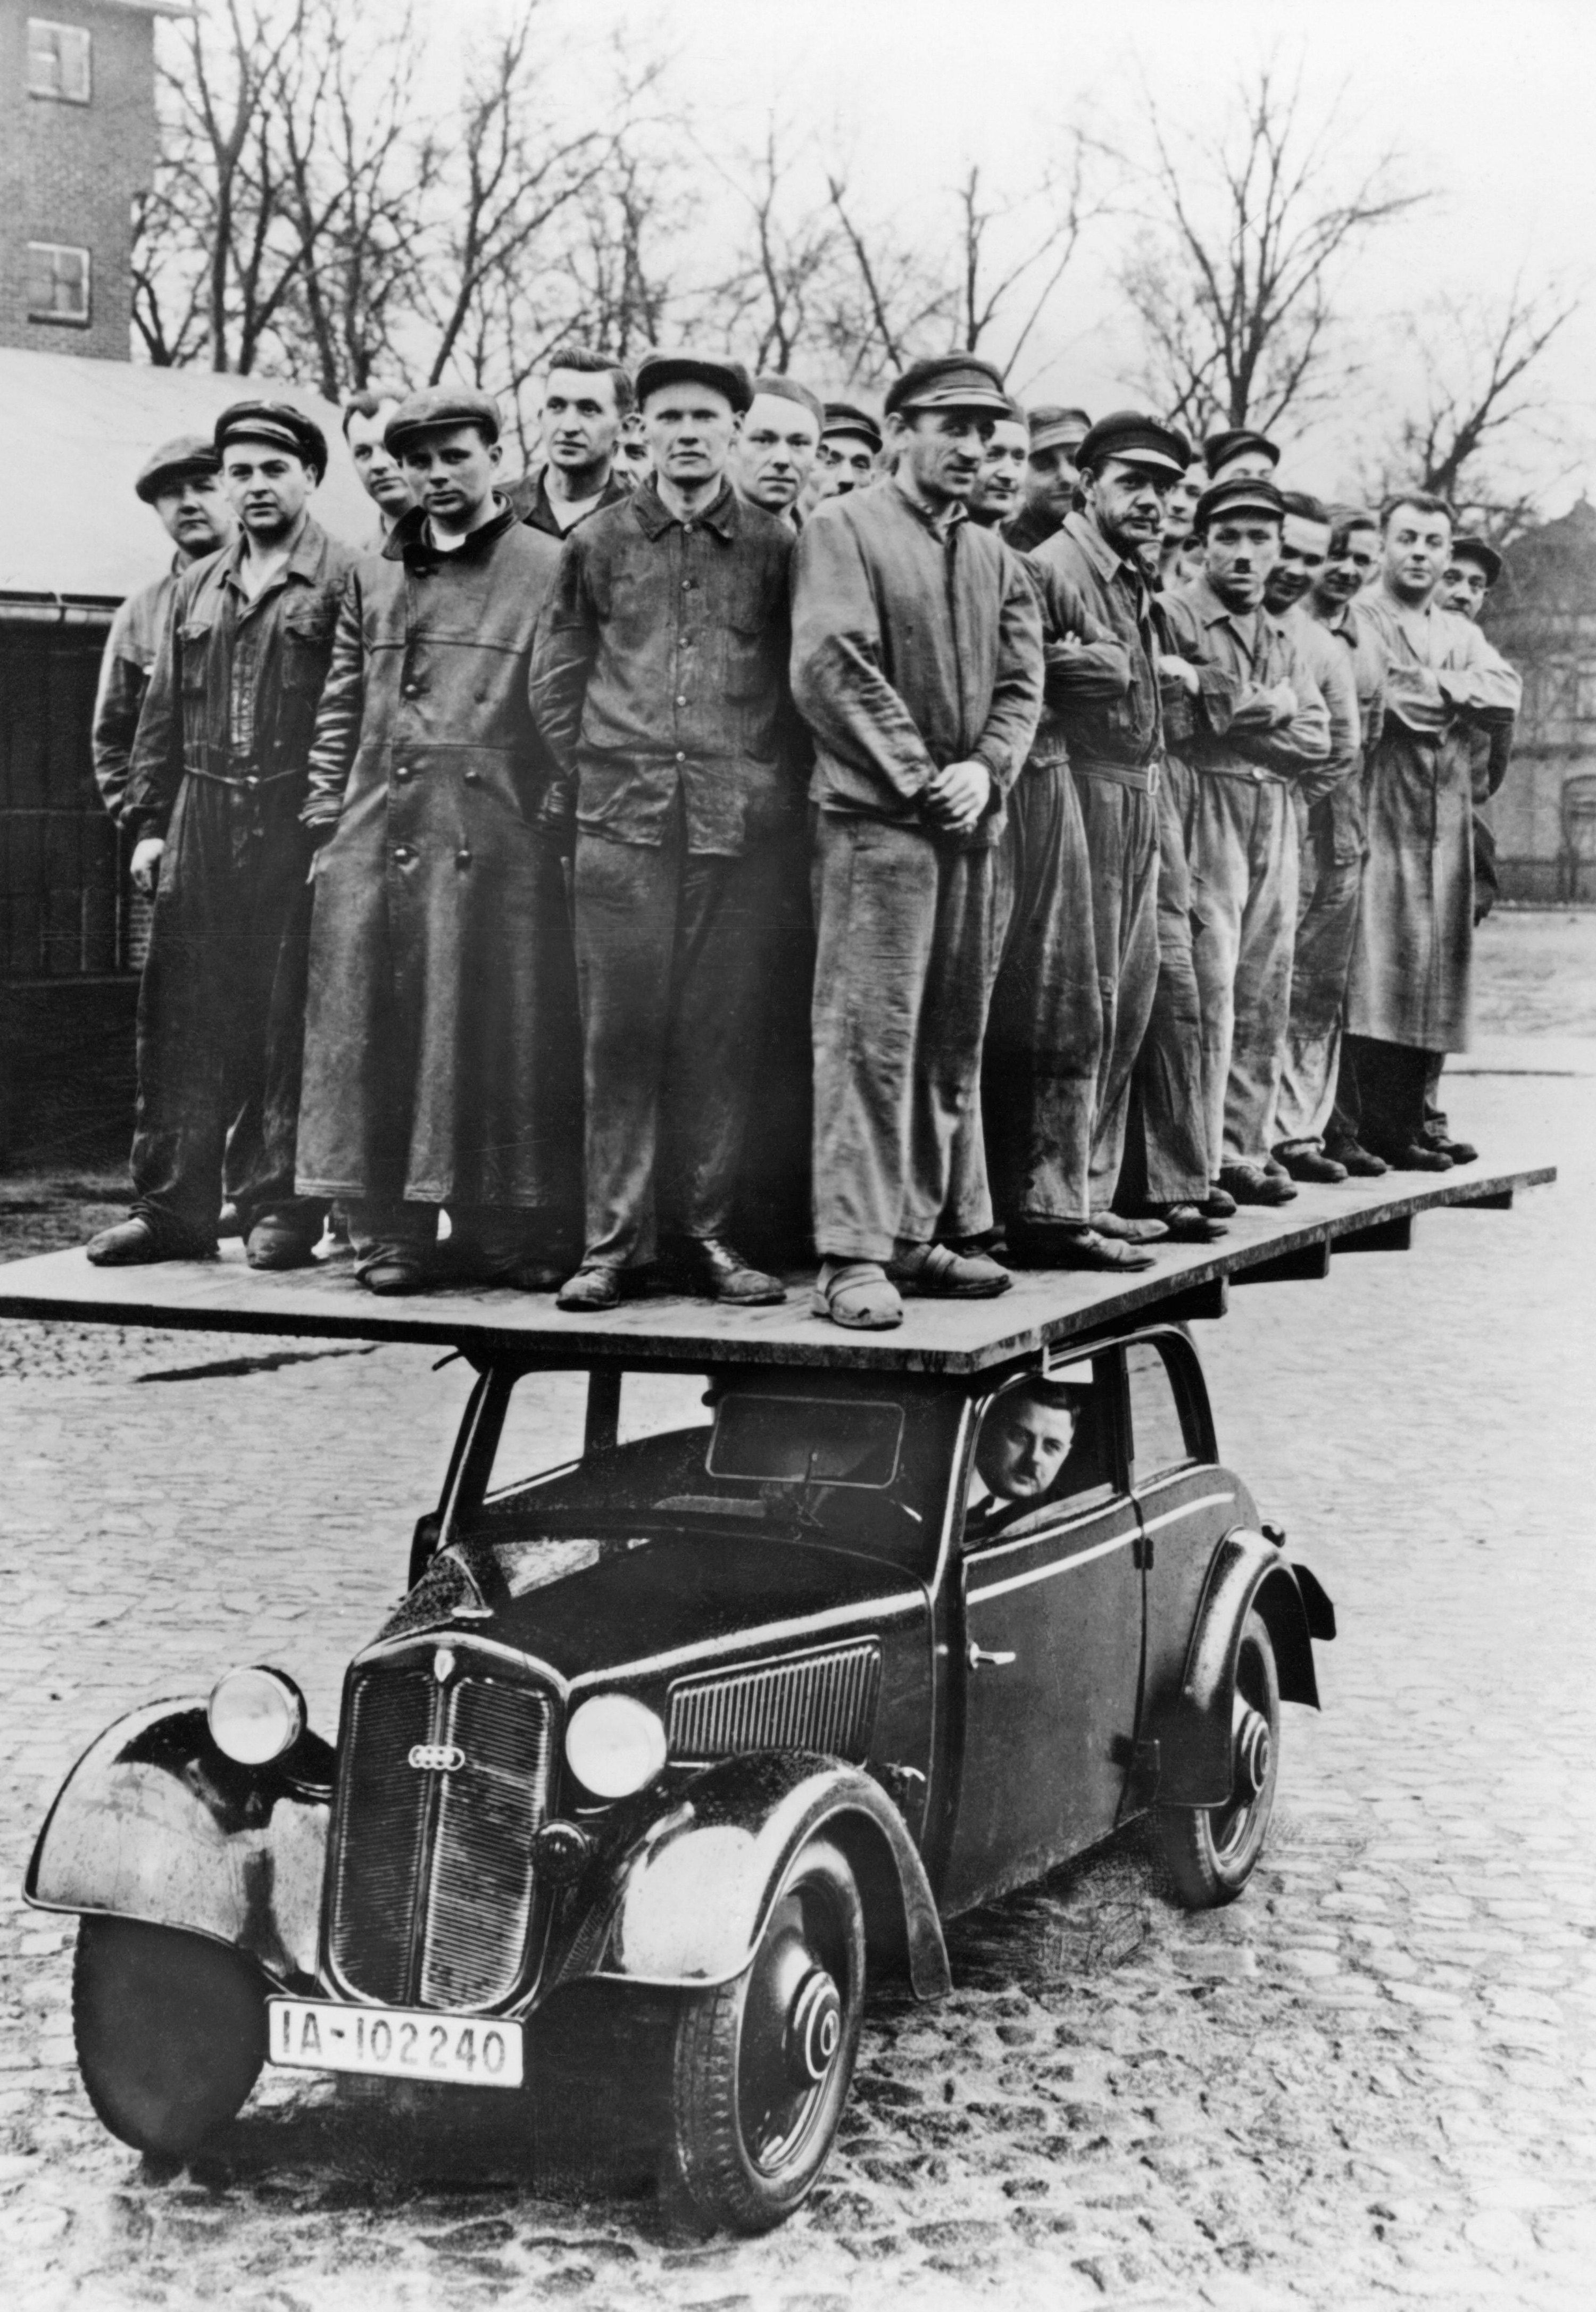 A man at the wheel as what looks like dozens of men stand on a wooden board on the roof